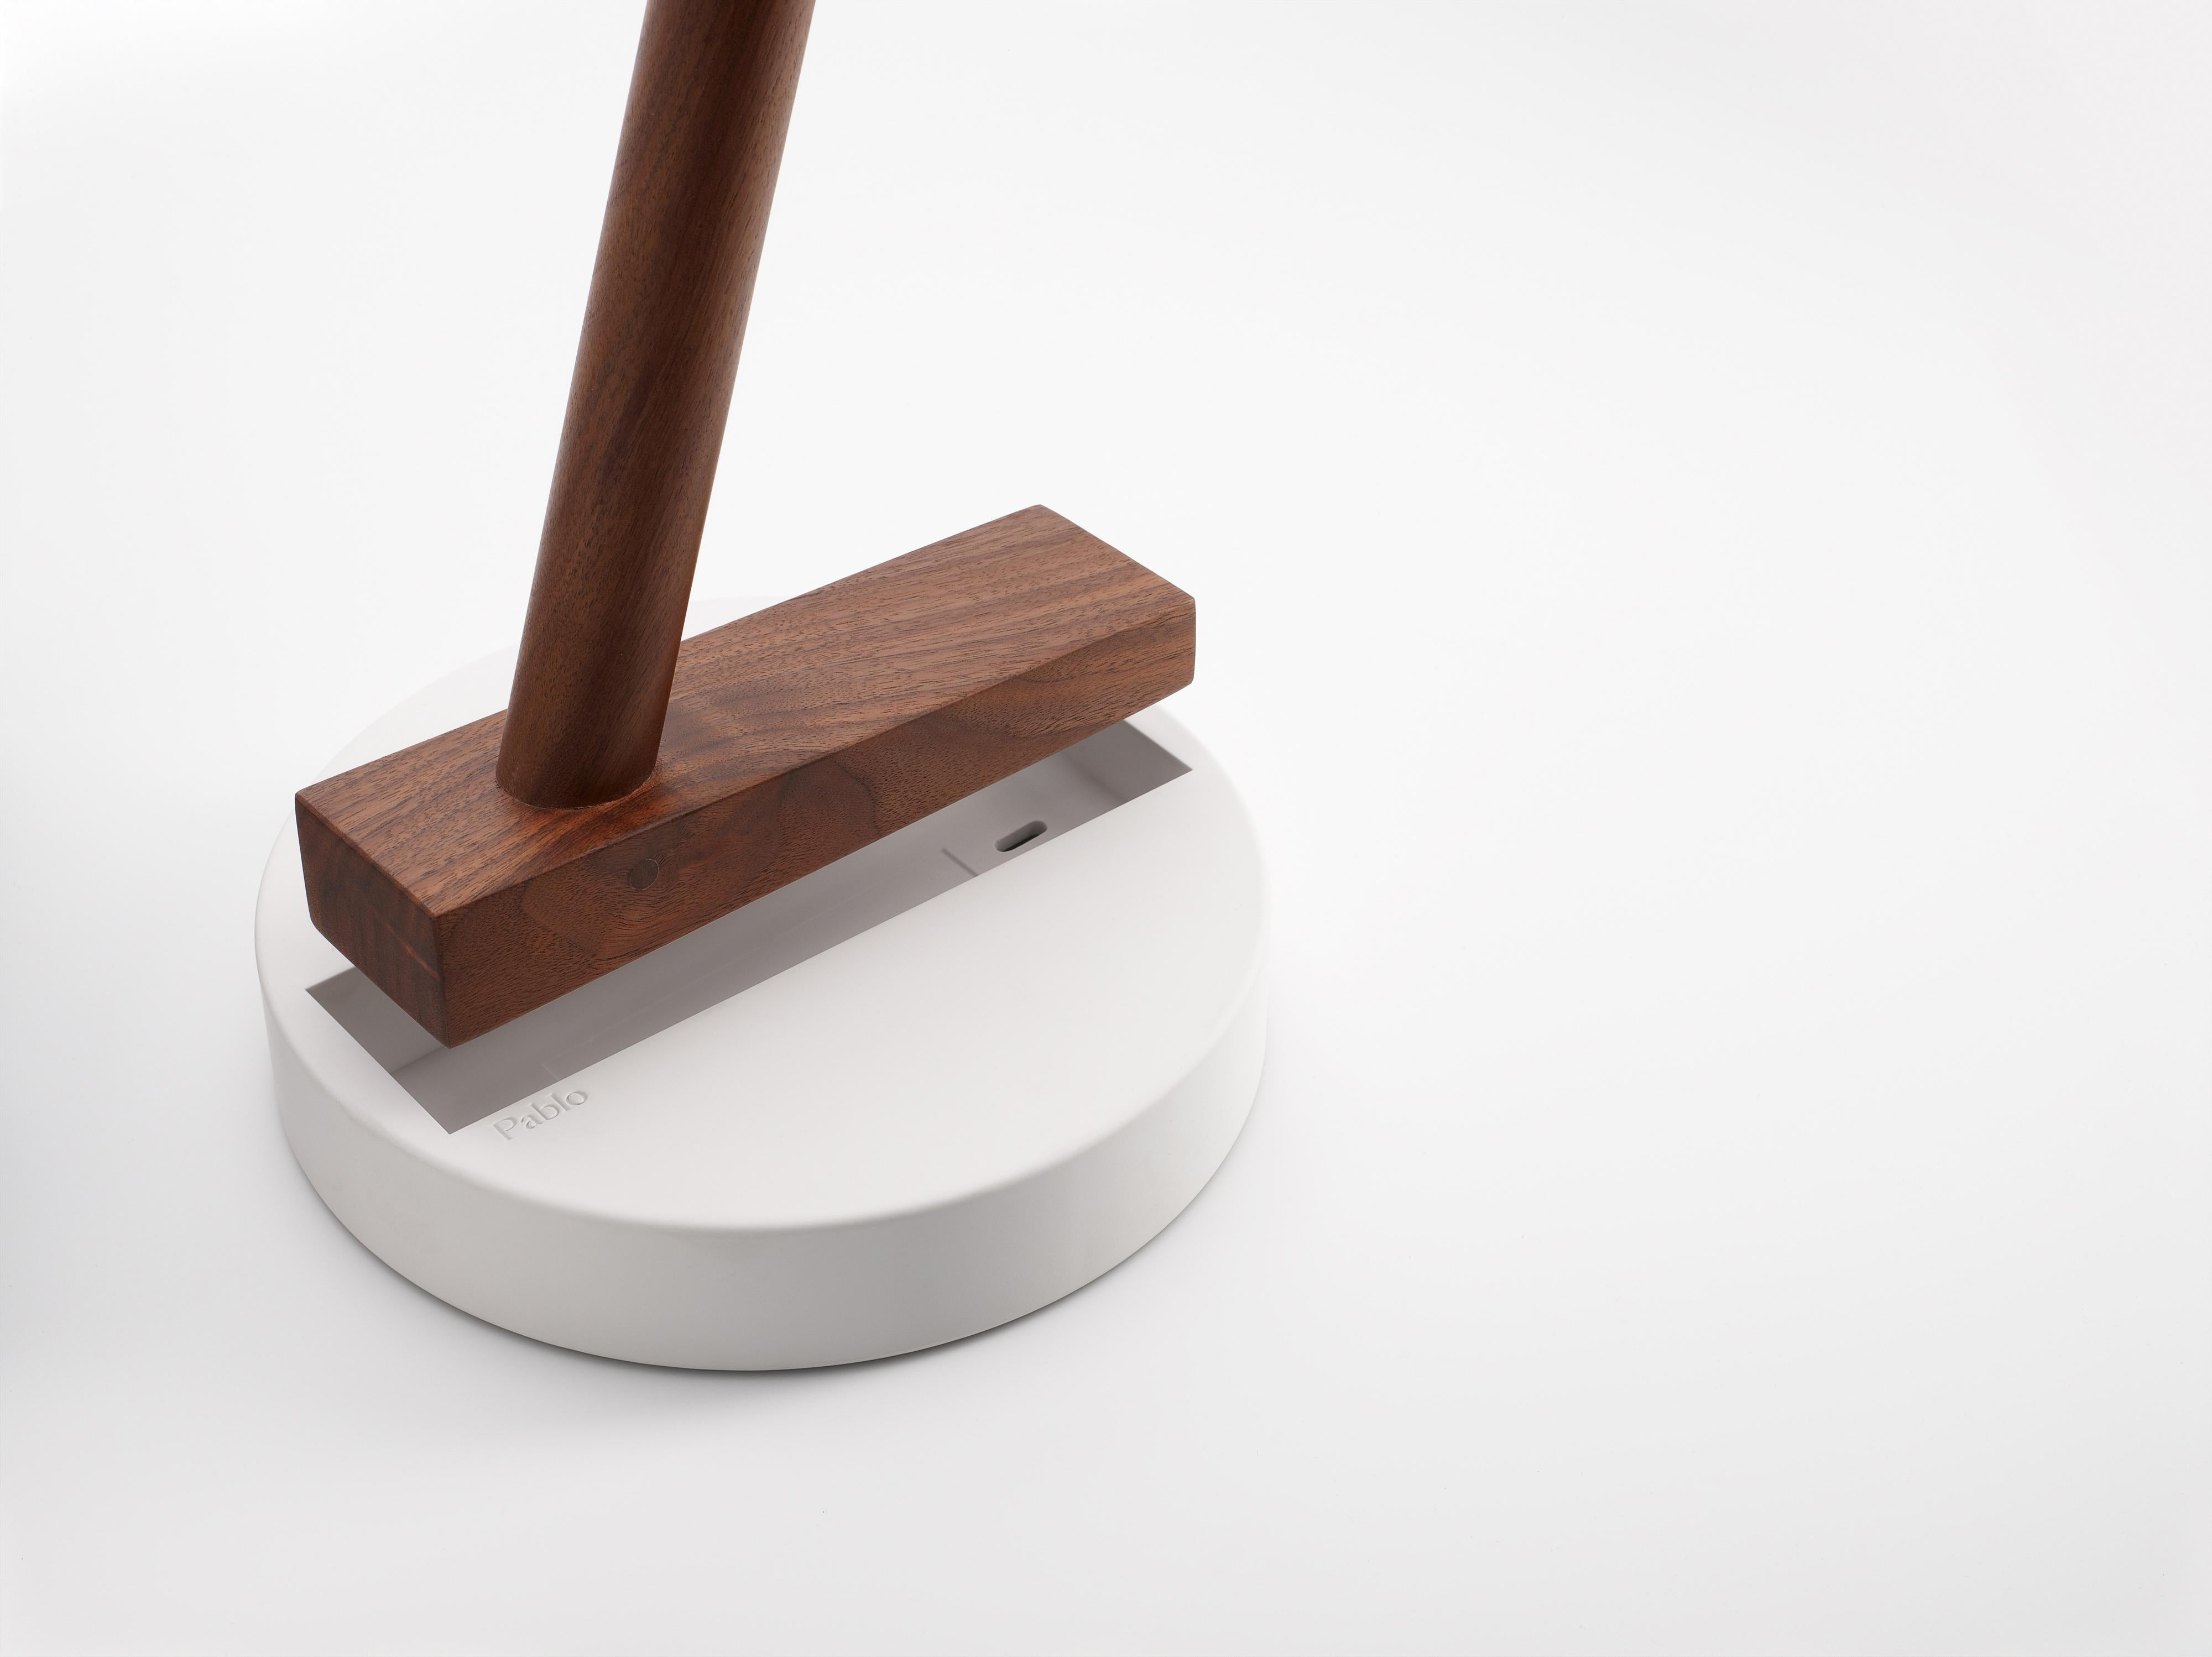 American Clamp Freestanding Table Lamp in Walnut by Pablo Designs